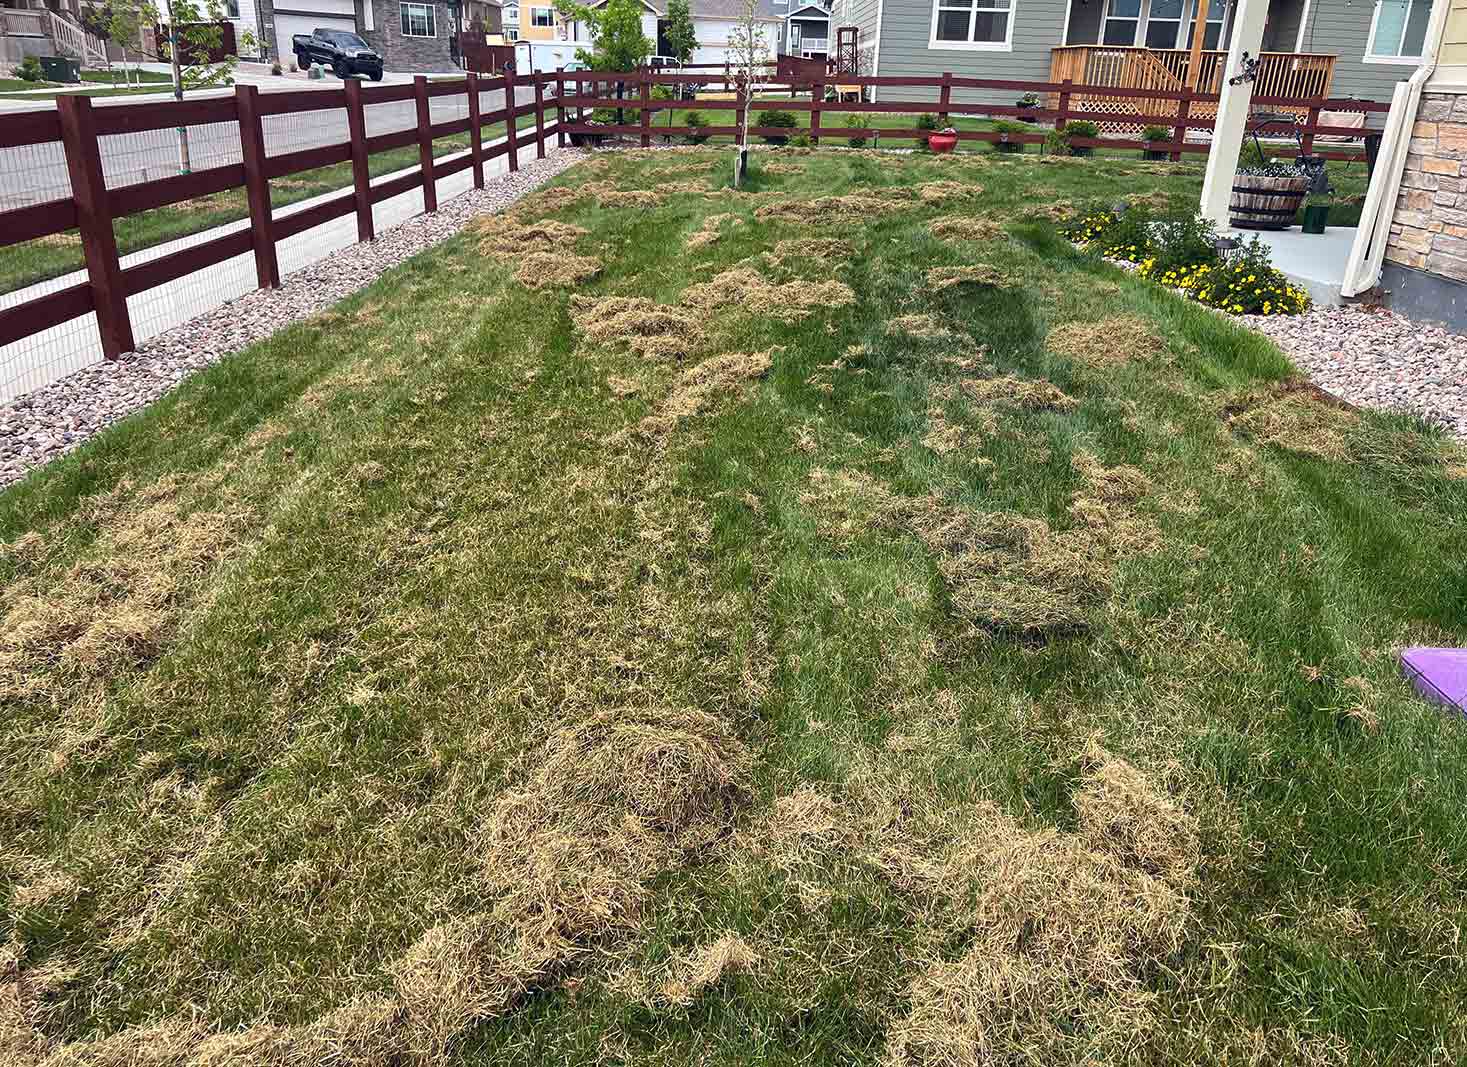 Potential drawbacks of using grass clippings